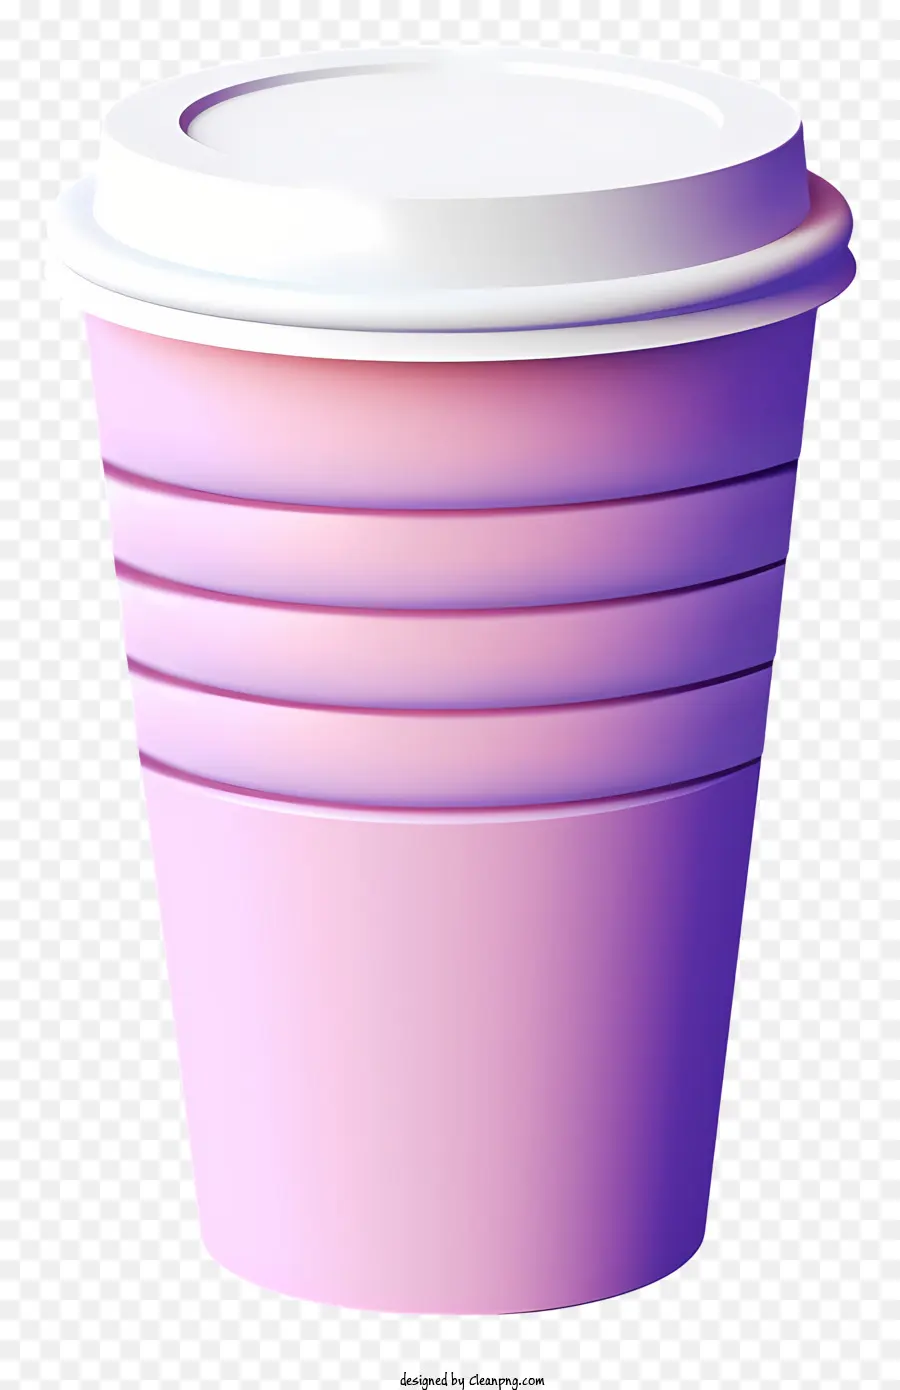 plastic cup purple background white writing full cup small amount of liquid